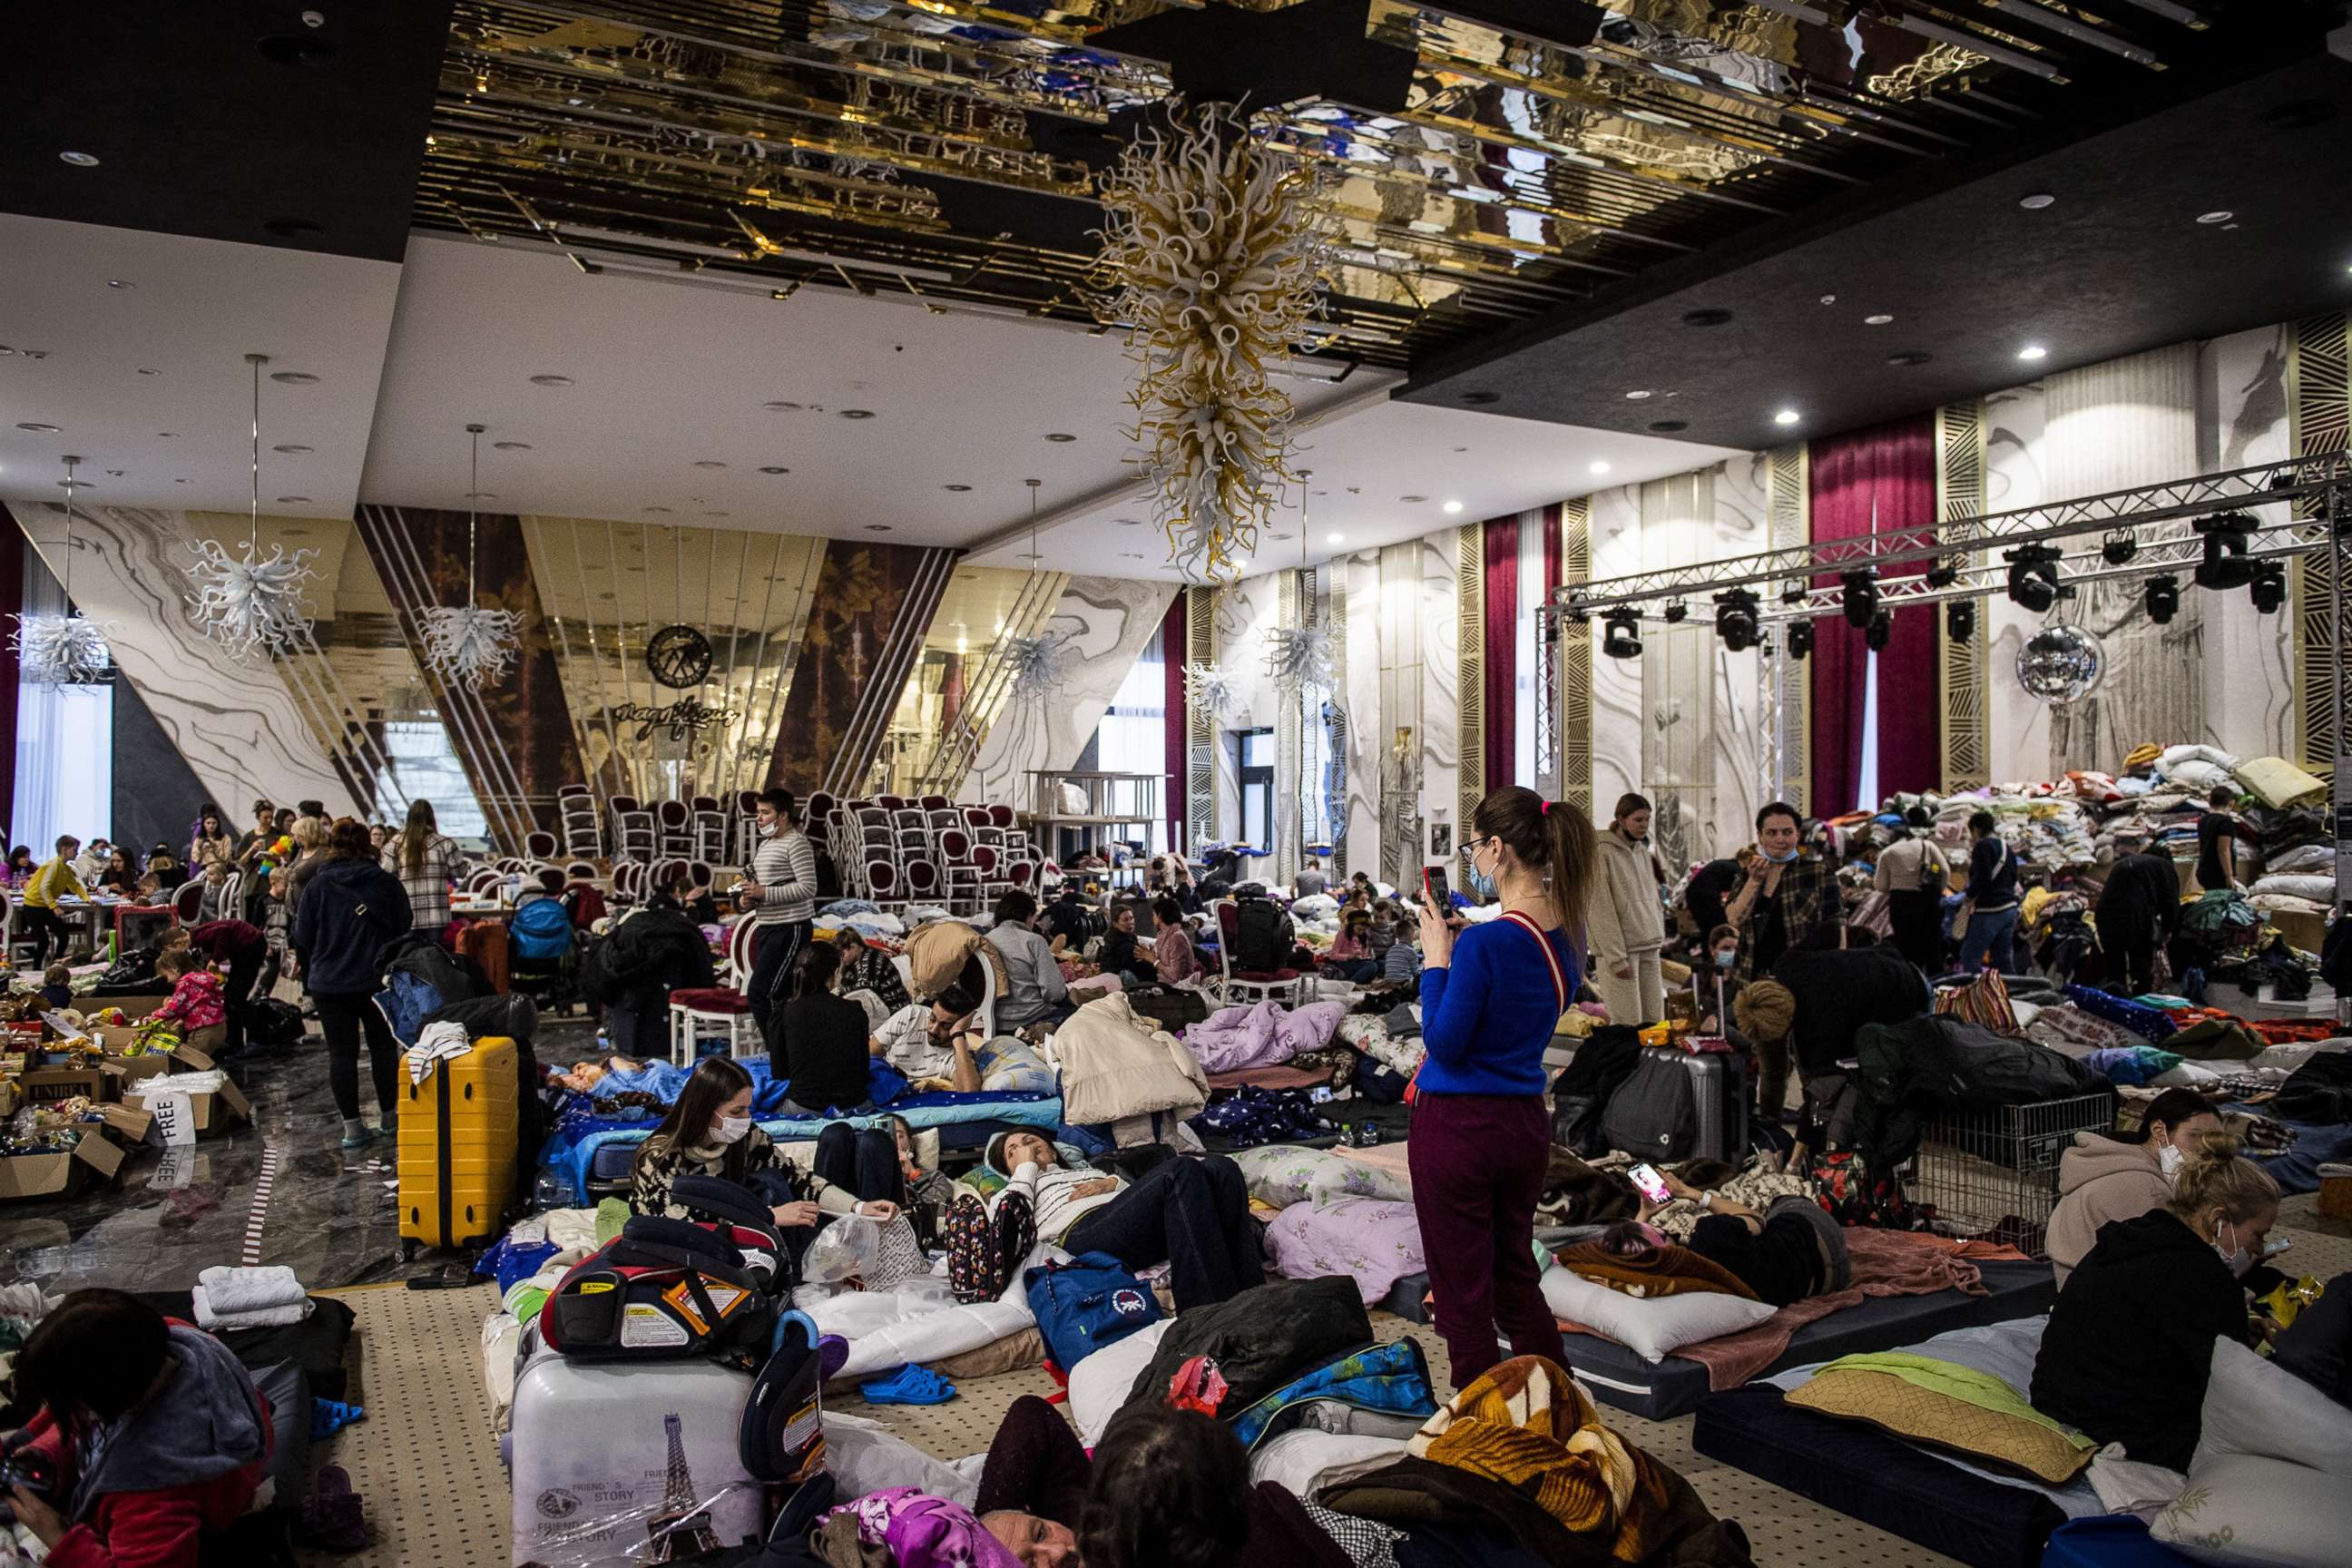 PHOTO: A reception center for Ukrainian refugees is set up in a luxury hotel in Suceava, Romania, on March 2, 2022.